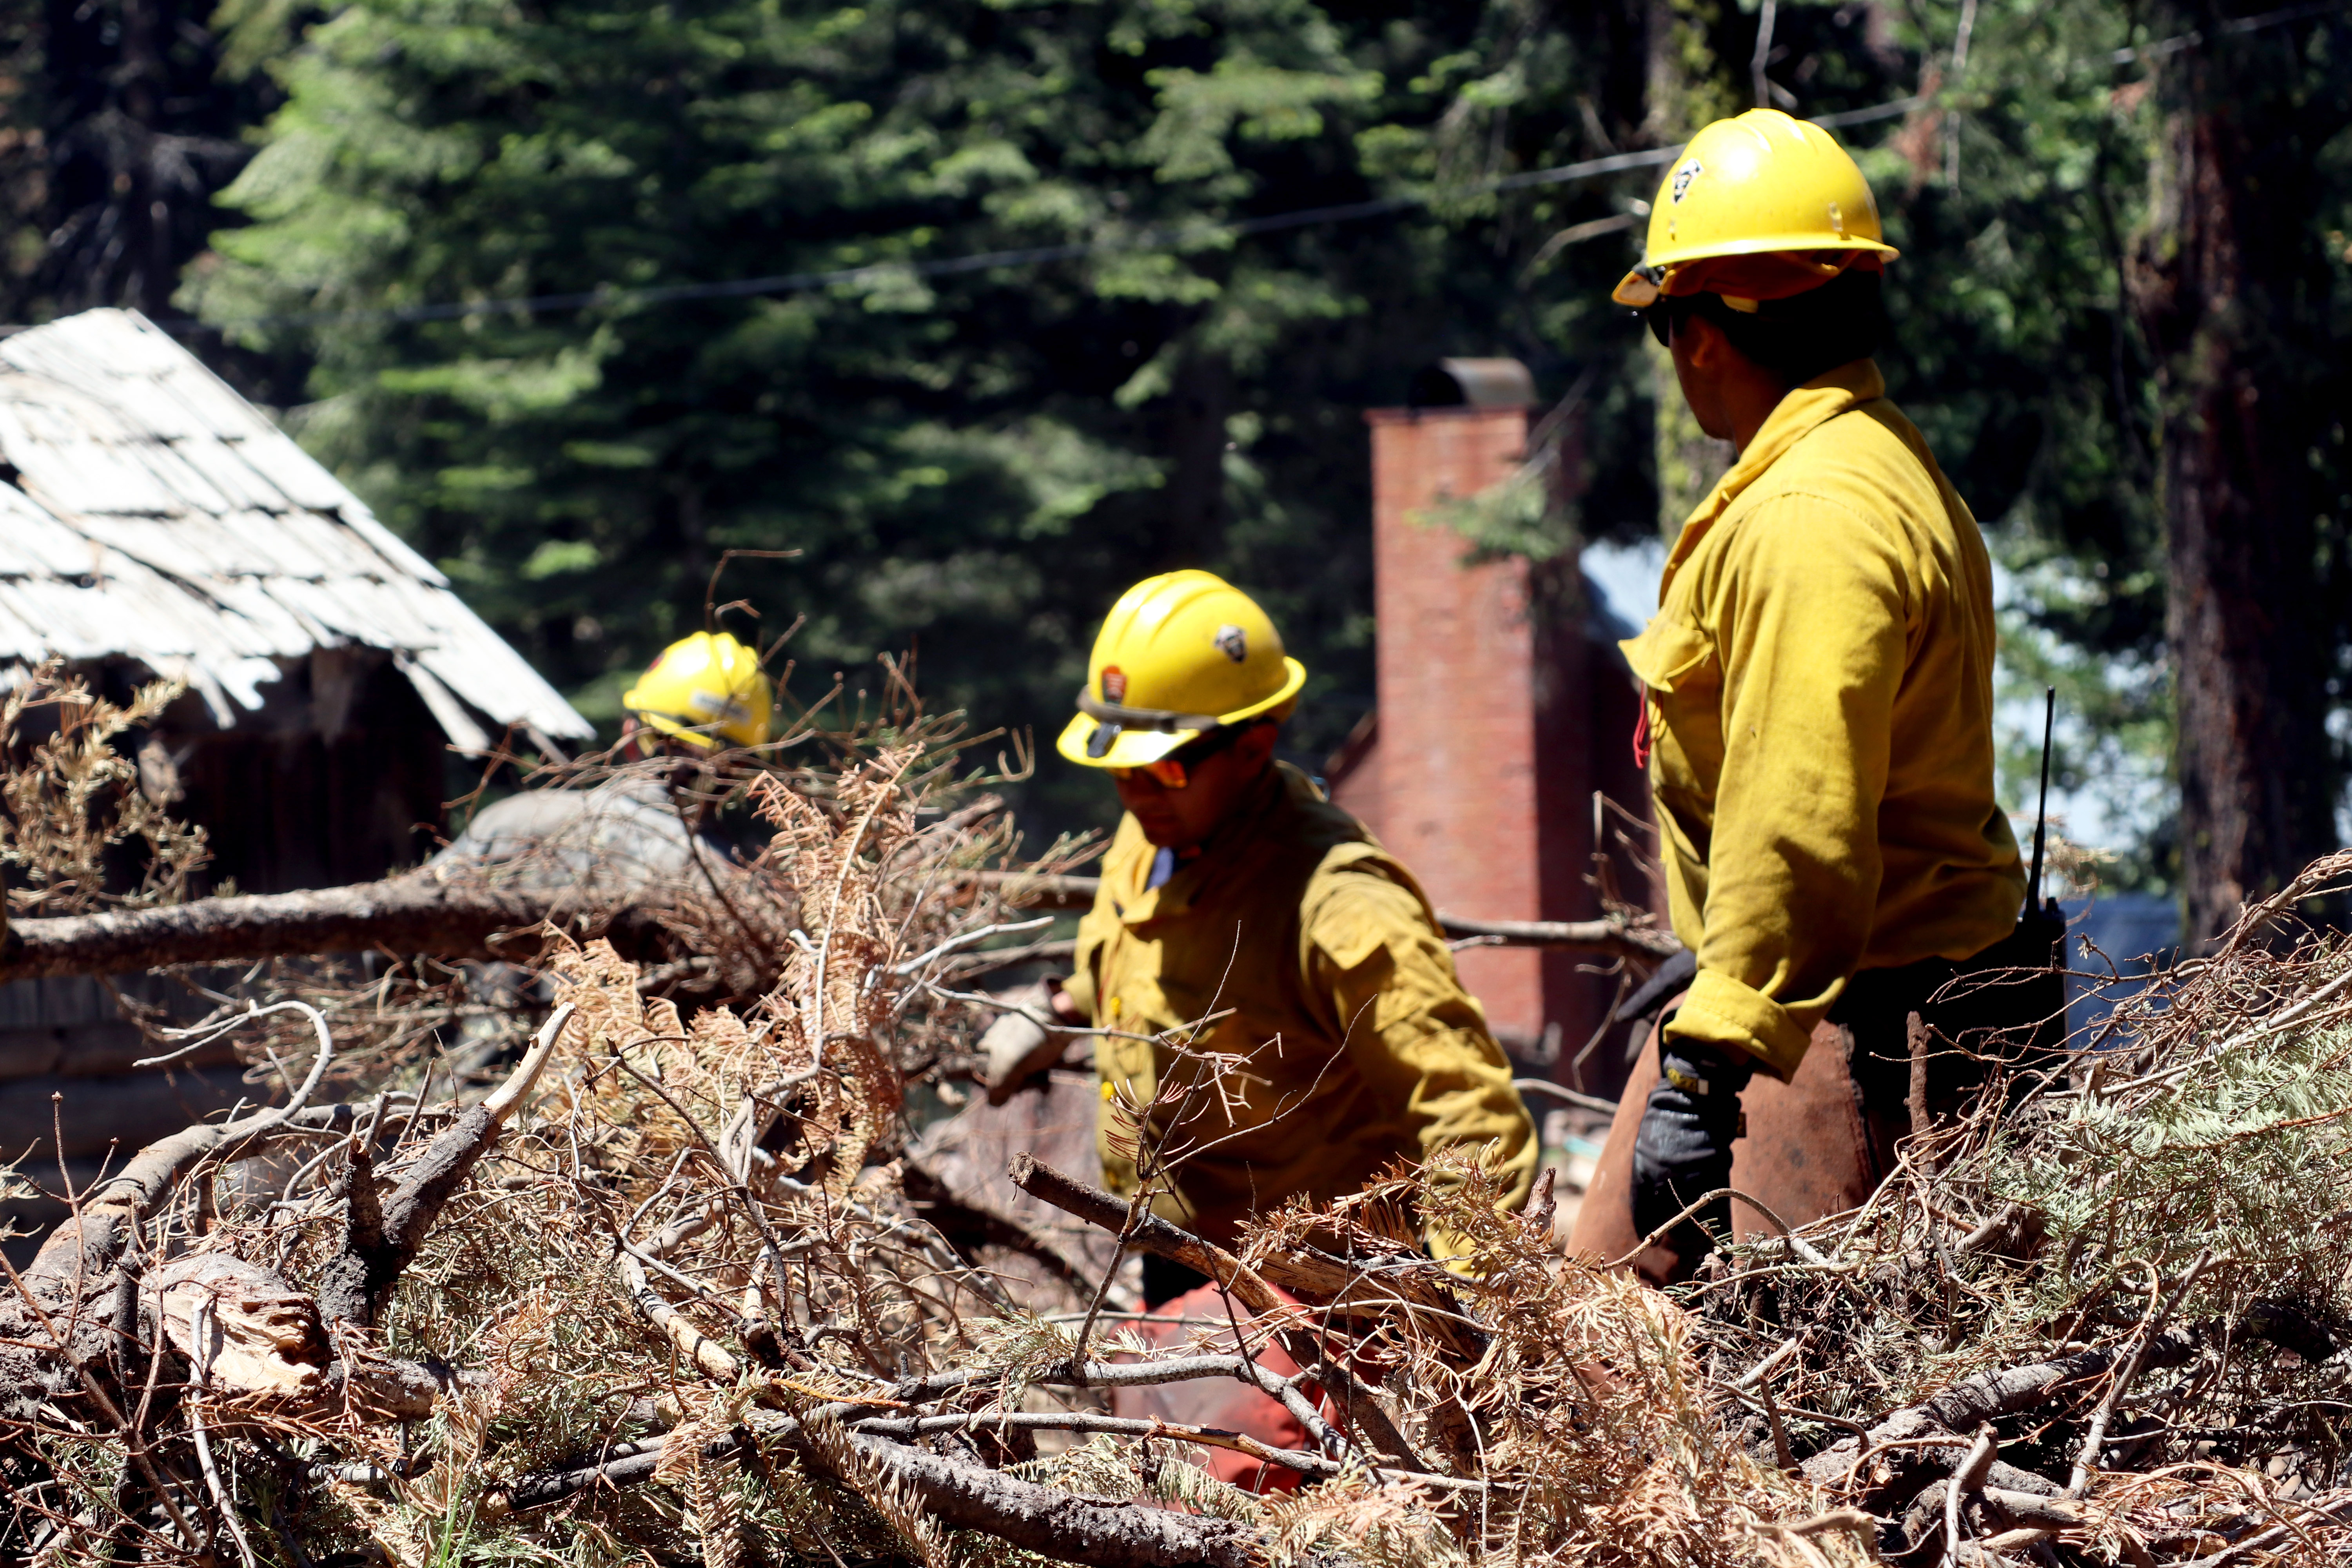 Firefighters from Sequoia National Park Engine 72 based in Three Rivers, CA, work on a defensible space clean-up project in the parks in 2017.